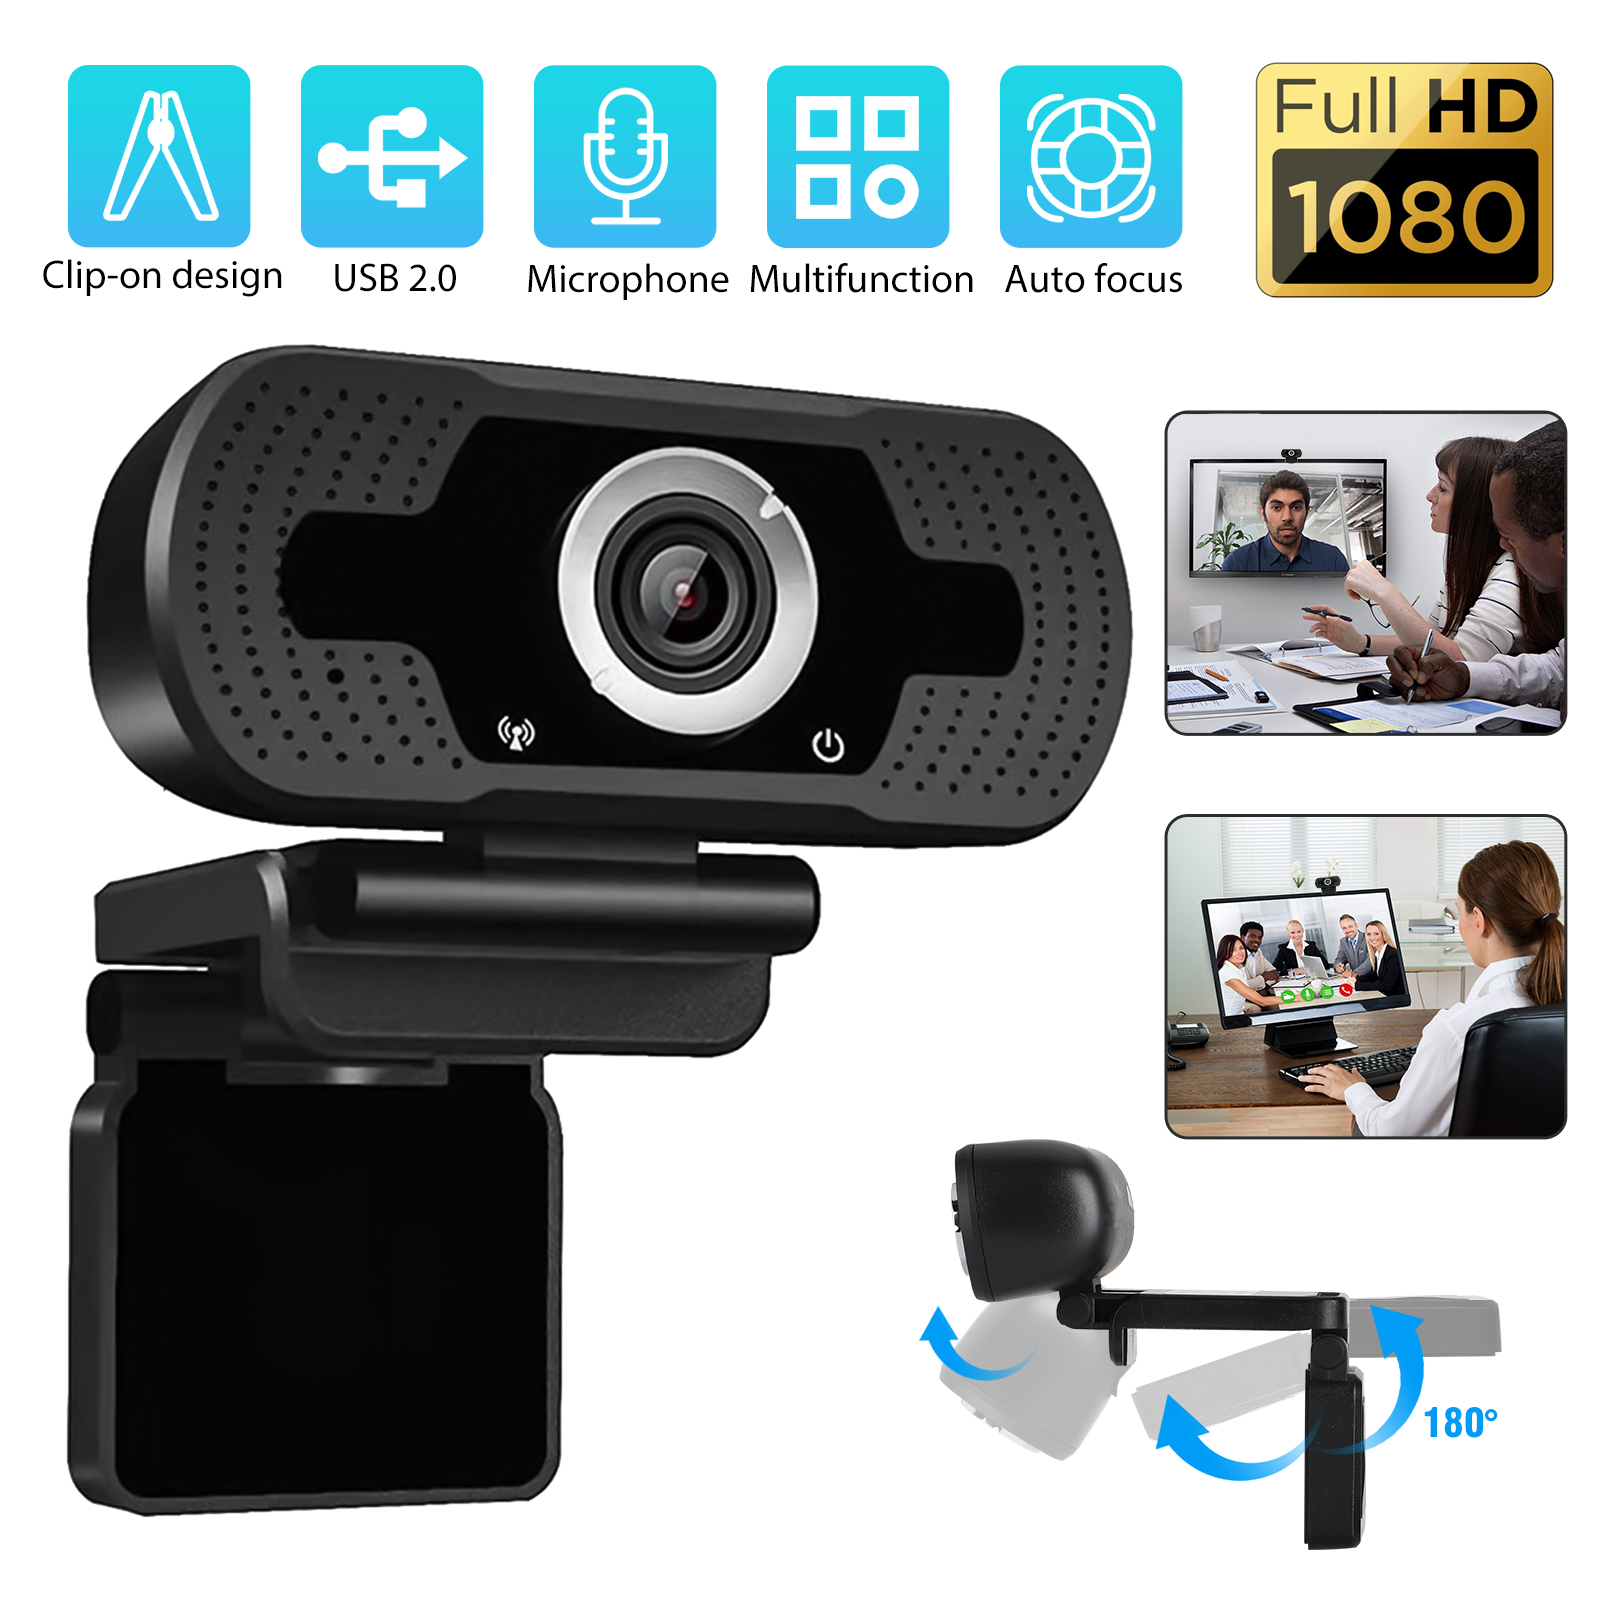 U4-N-HD-1080P-110deg-Wide-Angle-Auto-focus-USB-Webcam-Conference-Live-Computer-Camera-Built-in-Noise-1690165-1